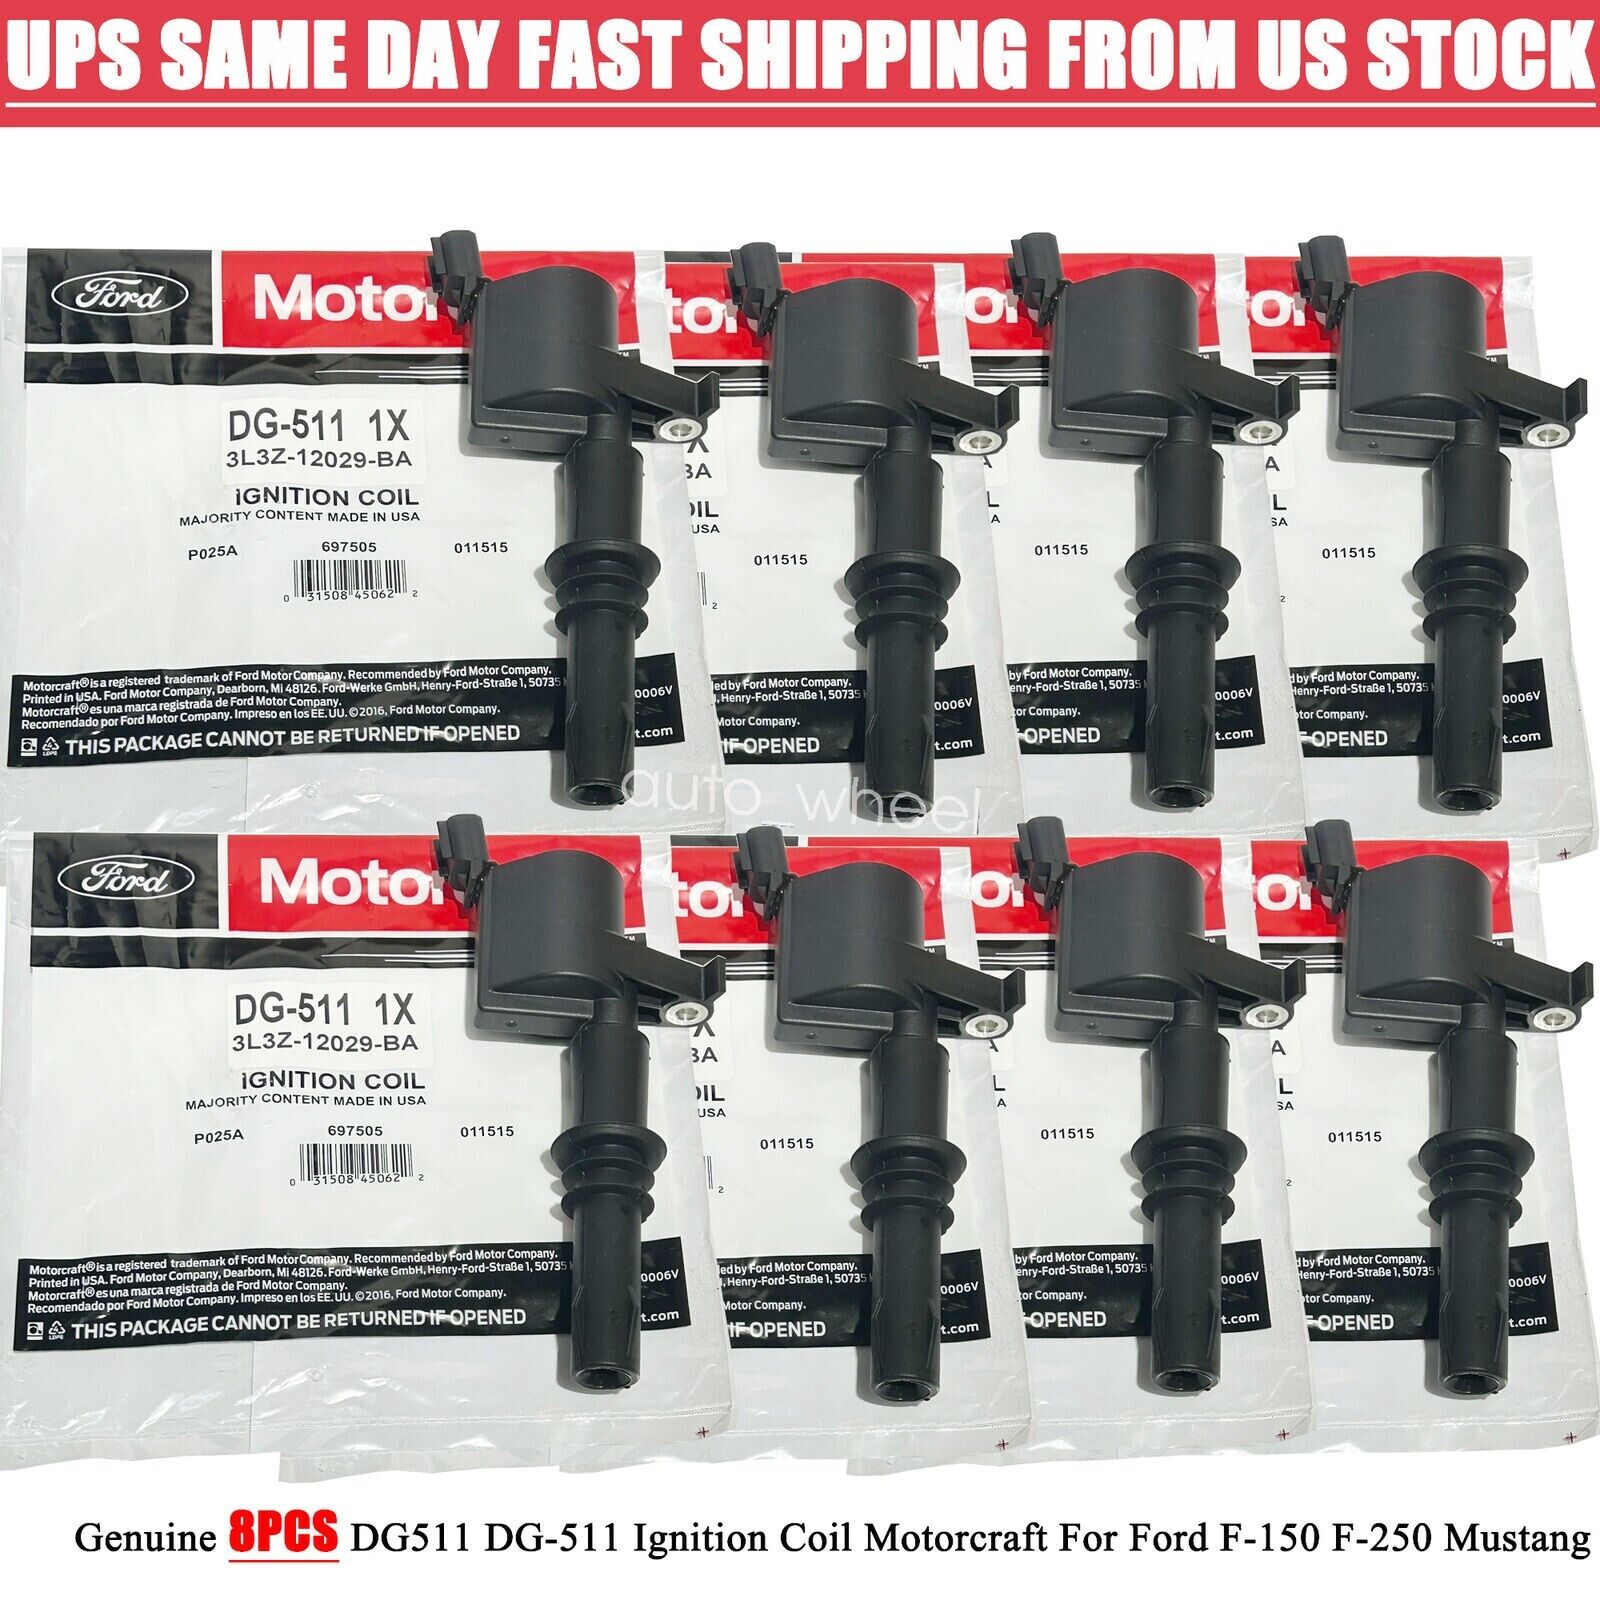 8PCS NEW OEM DG-511 Ignition Coil For Mustang F150 Expedition 4.6L5.4L 2004-2008